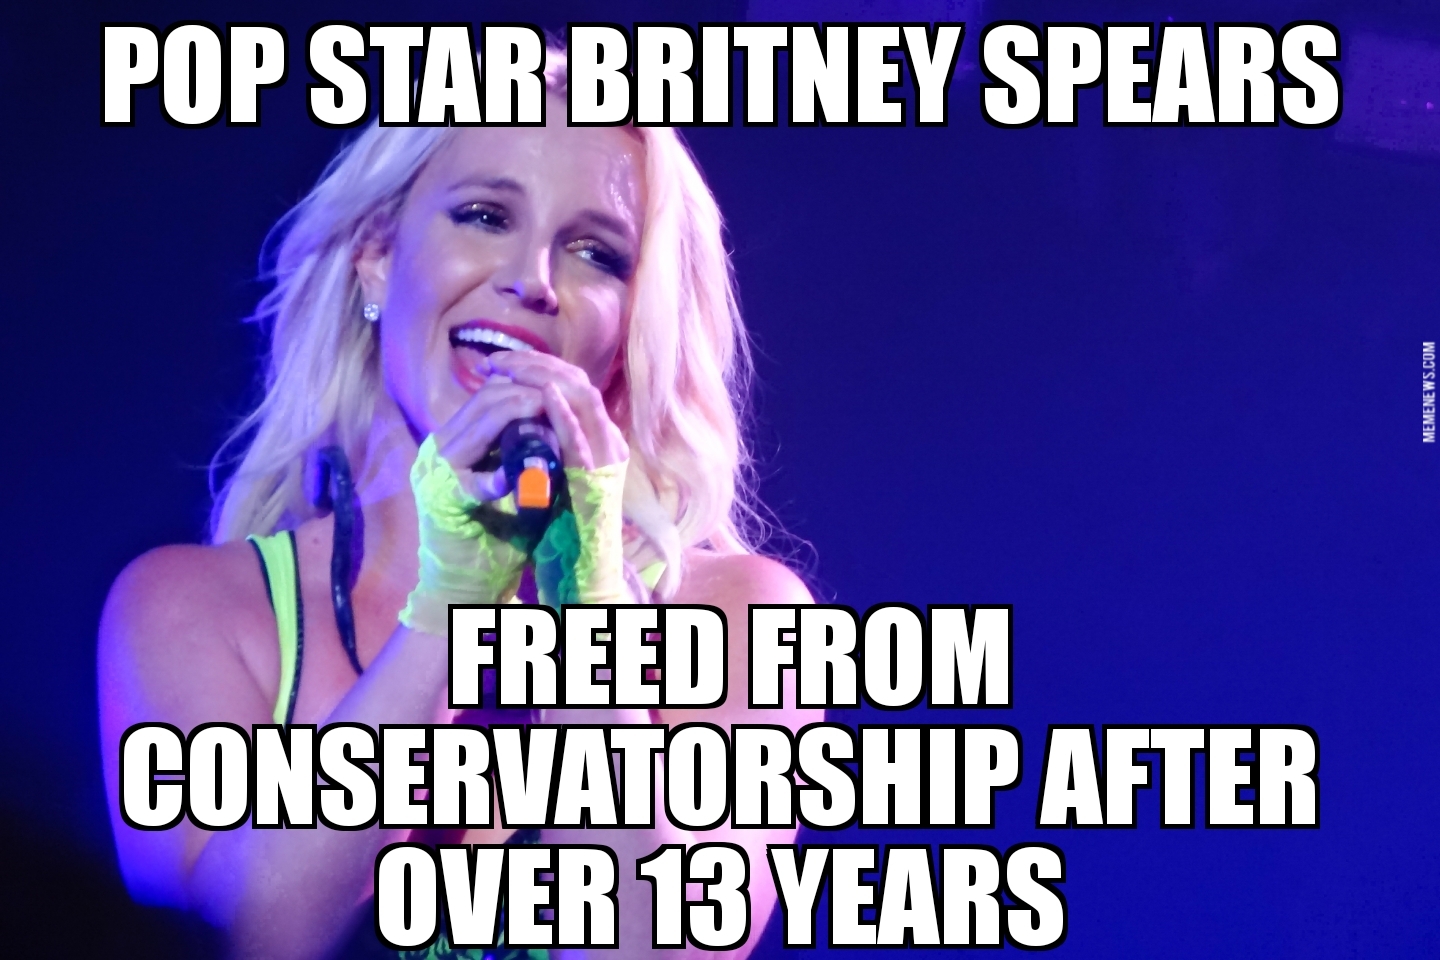 Britney Spears freed